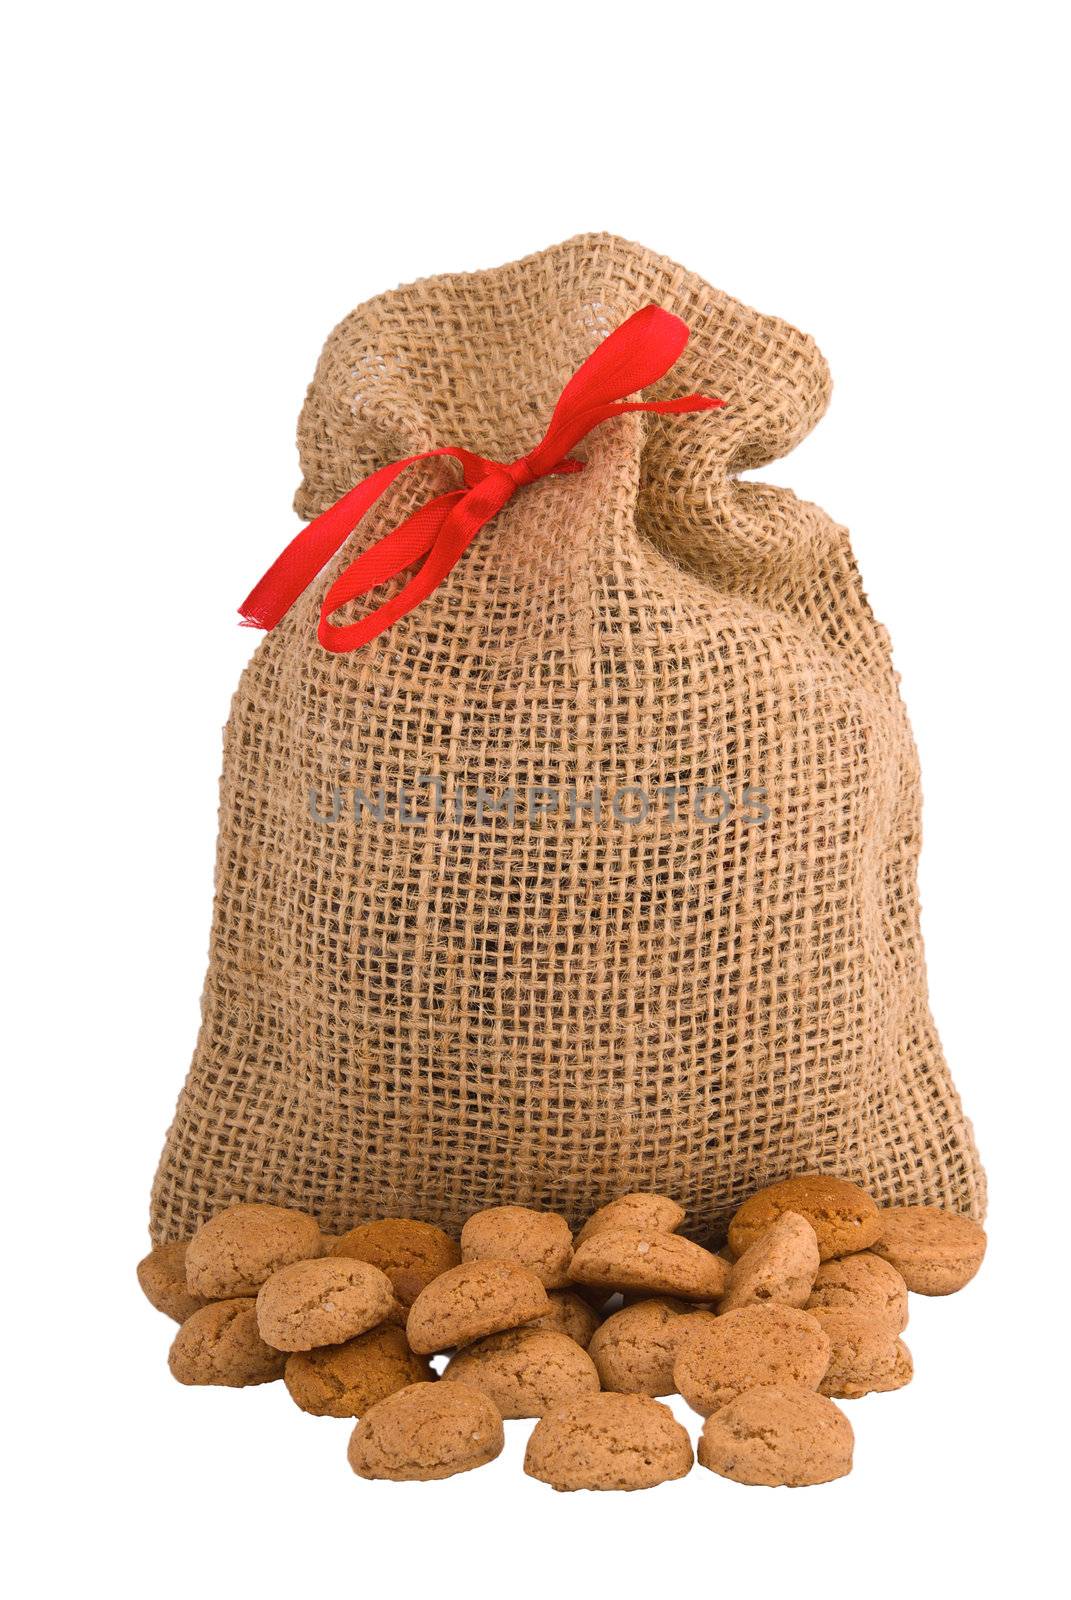 Bag for Pepernoten (gingernuts) Dutch biscuits specialty for Sinterklaas holliday